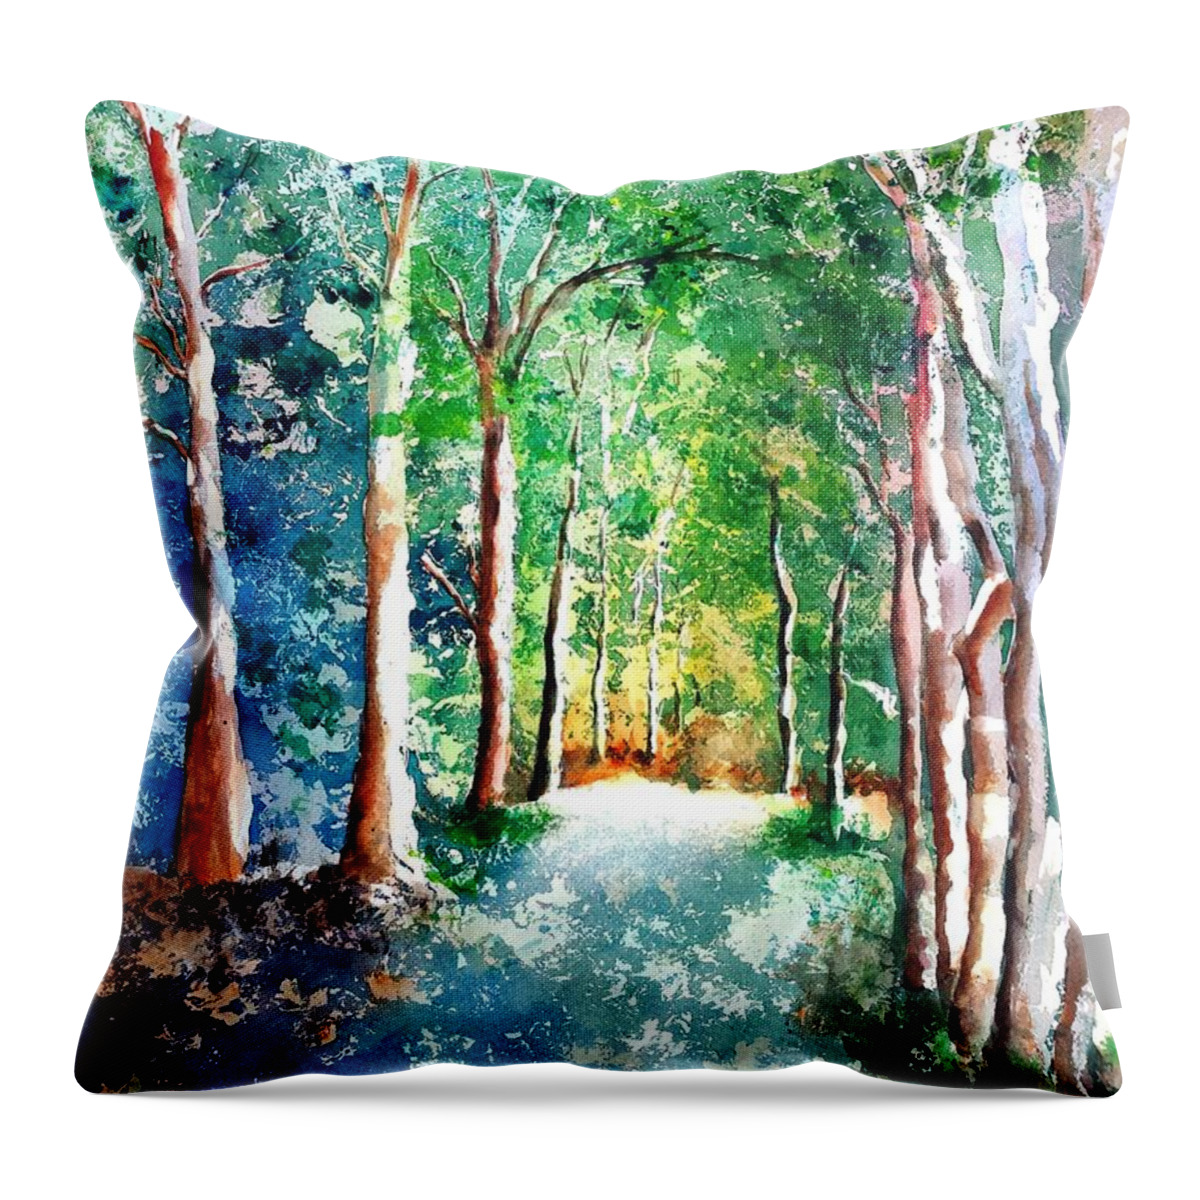 Trees Throw Pillow featuring the painting Shady Tree Lined Country Road by Carlin Blahnik CarlinArtWatercolor